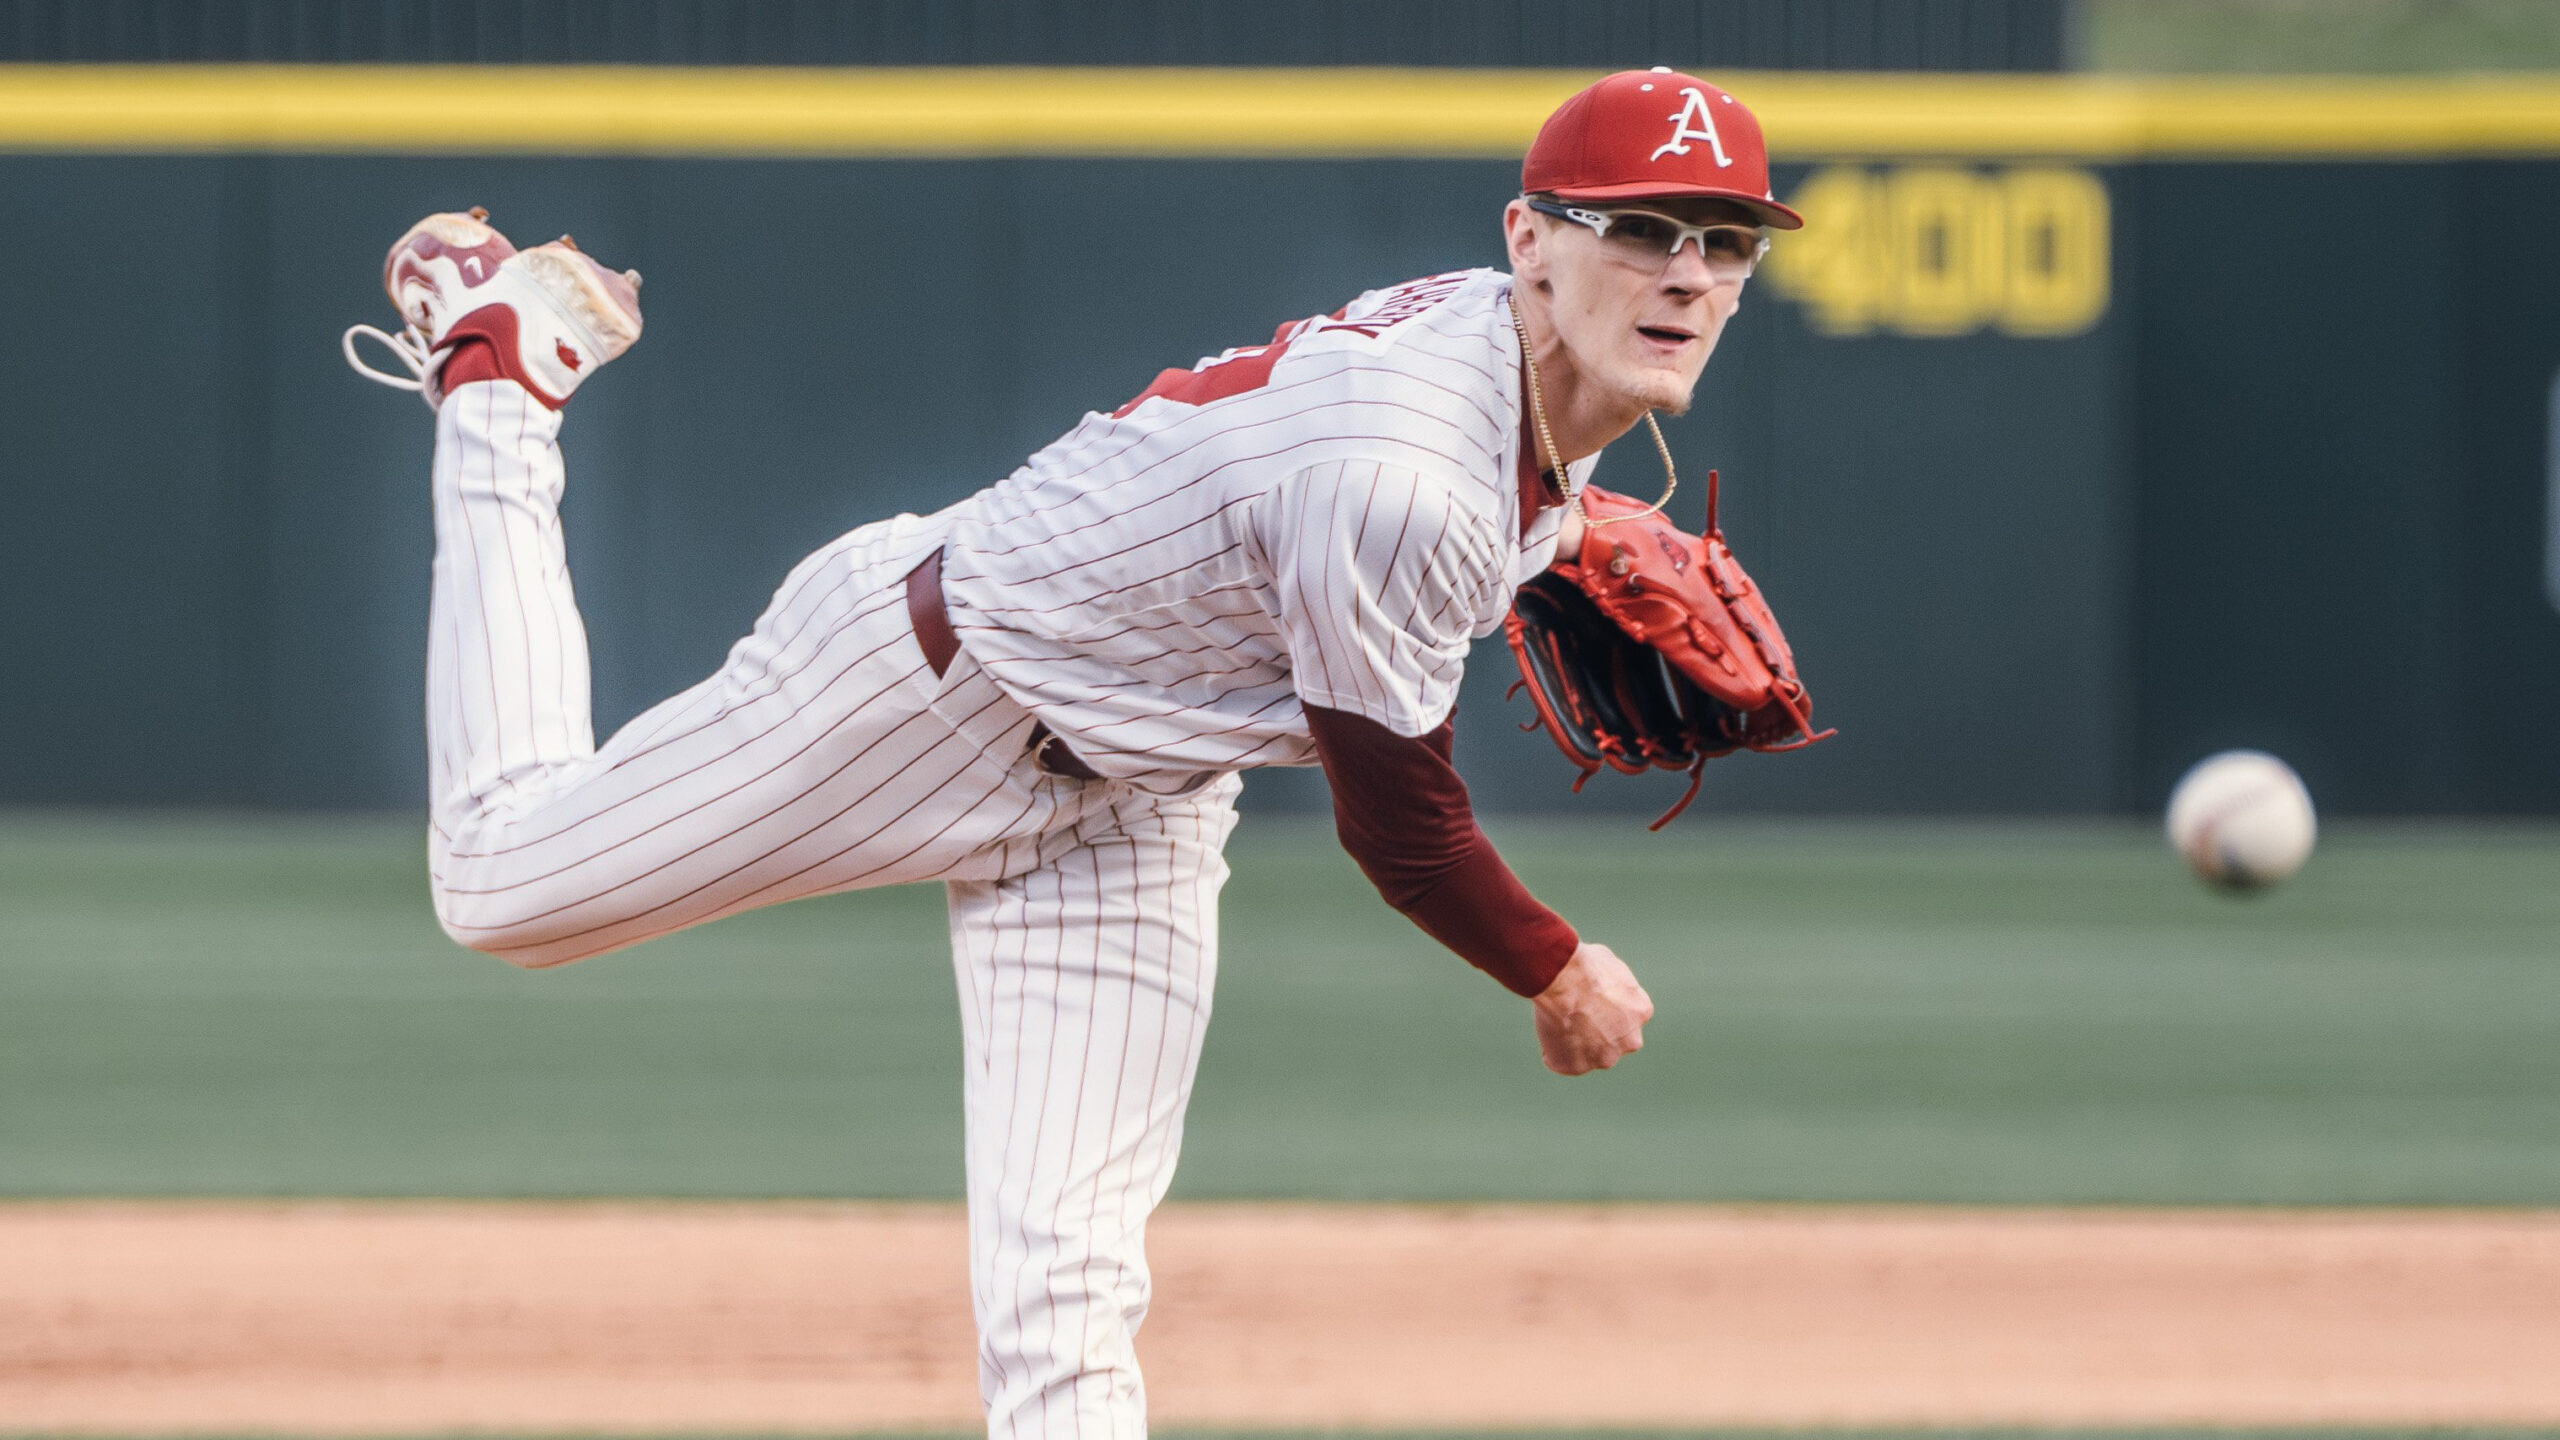 Quick Hits: Arkansas can’t climb out of early hole, drops Game 2 vs. Mississippi State